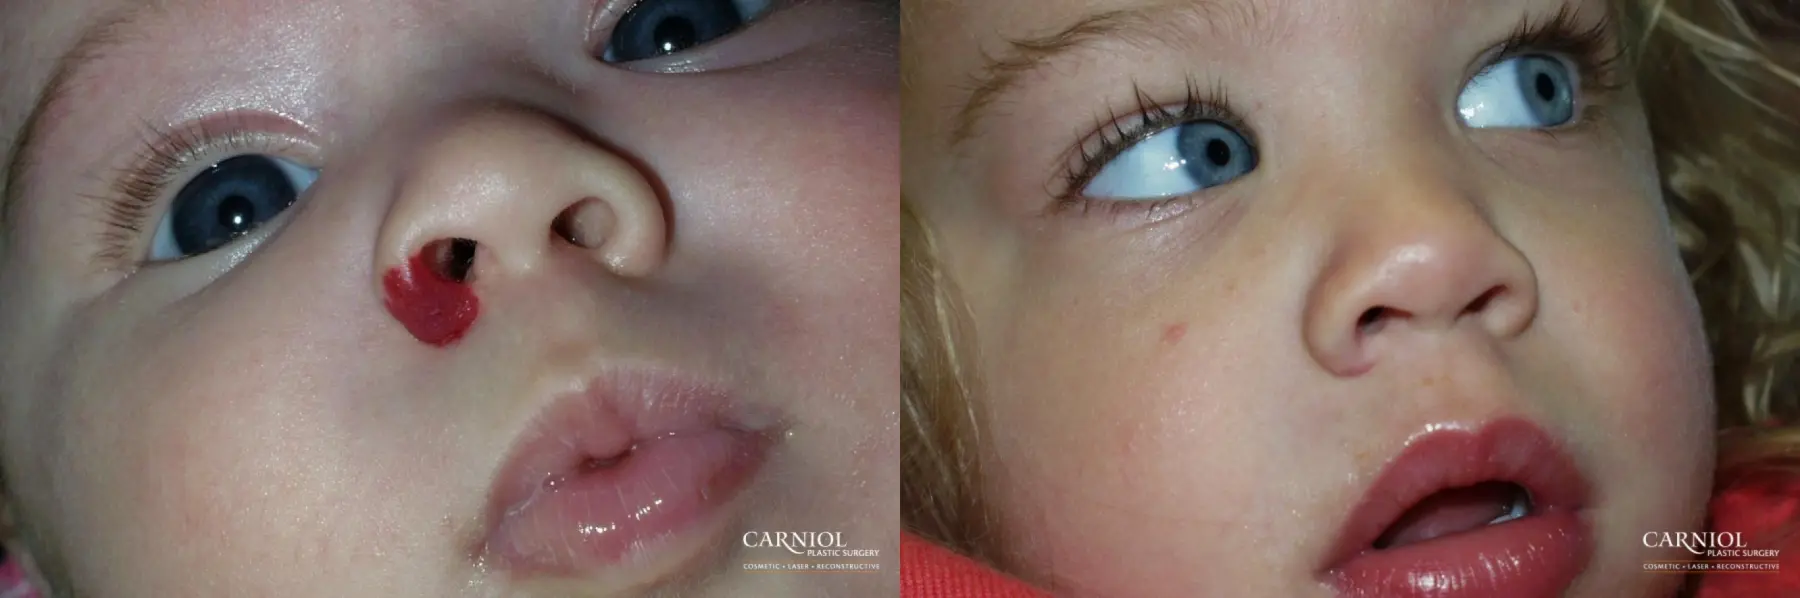 Hemangioma: Patient 2 - Before and After  